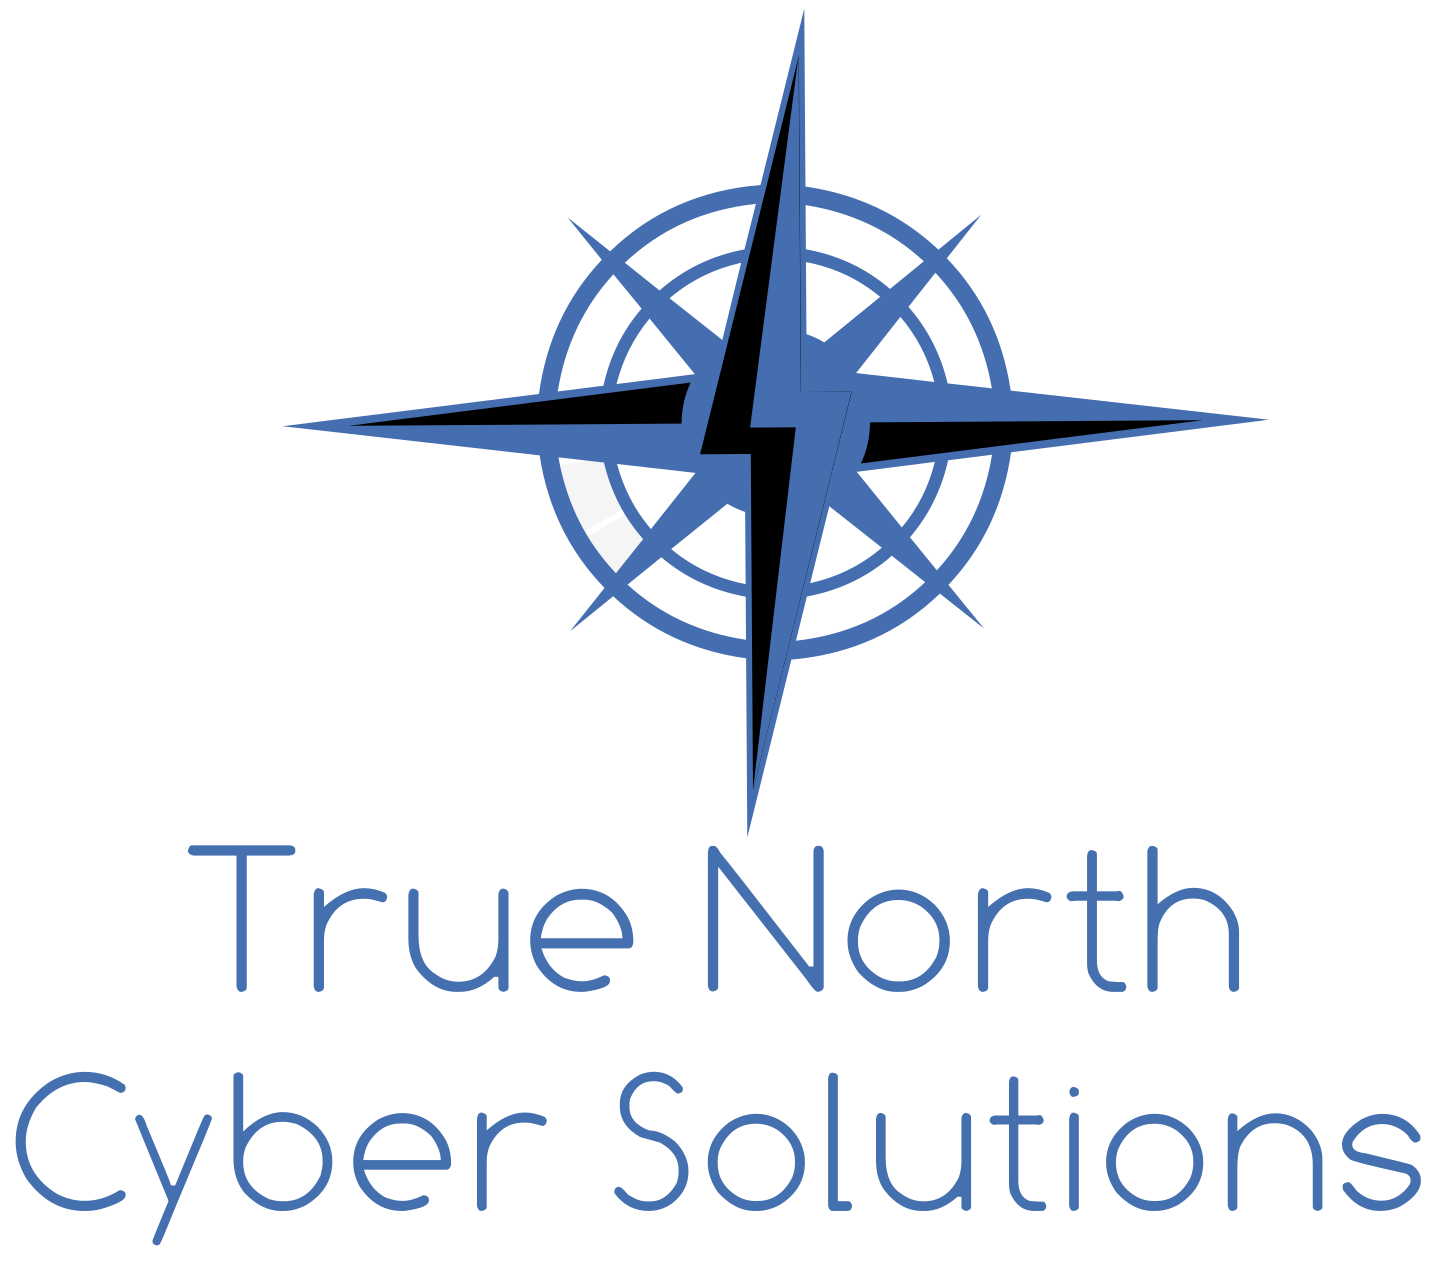 True North Cyber Solutions